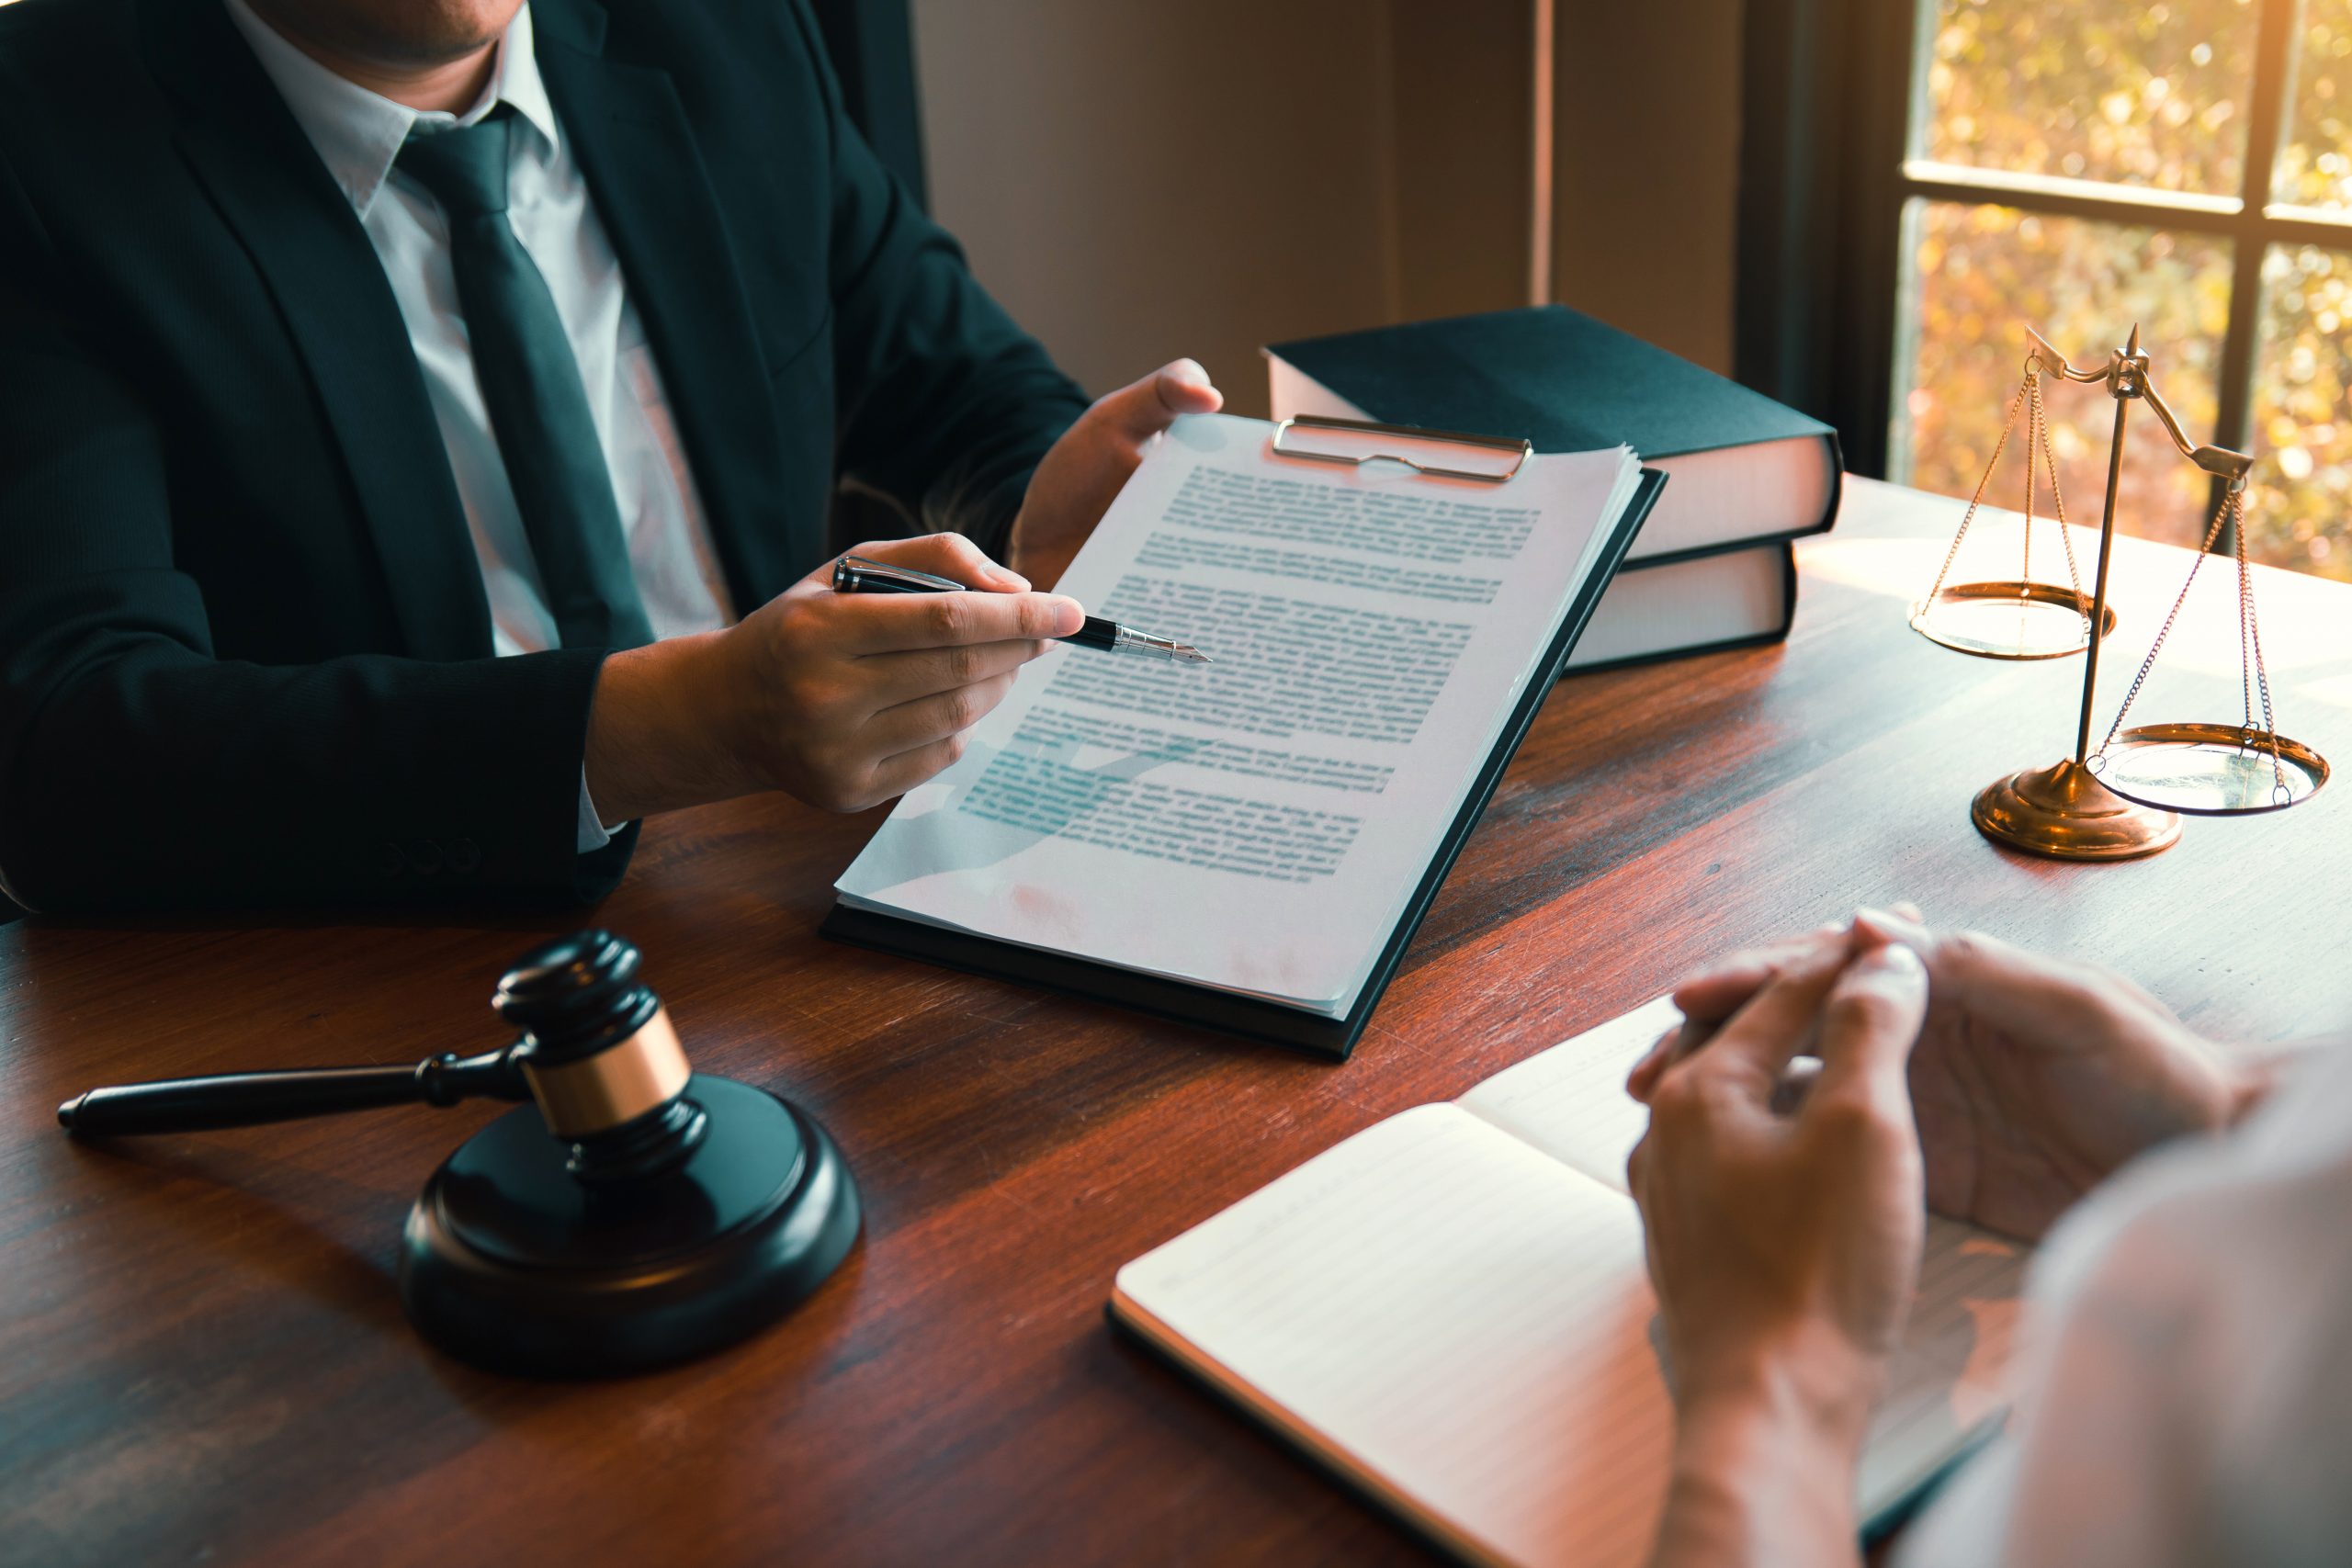 A lawyer in a suit provides client-centric legal representation as he reviews a document with a client at a wooden desk, with a gavel and legal scales visible, in a professional office setting.